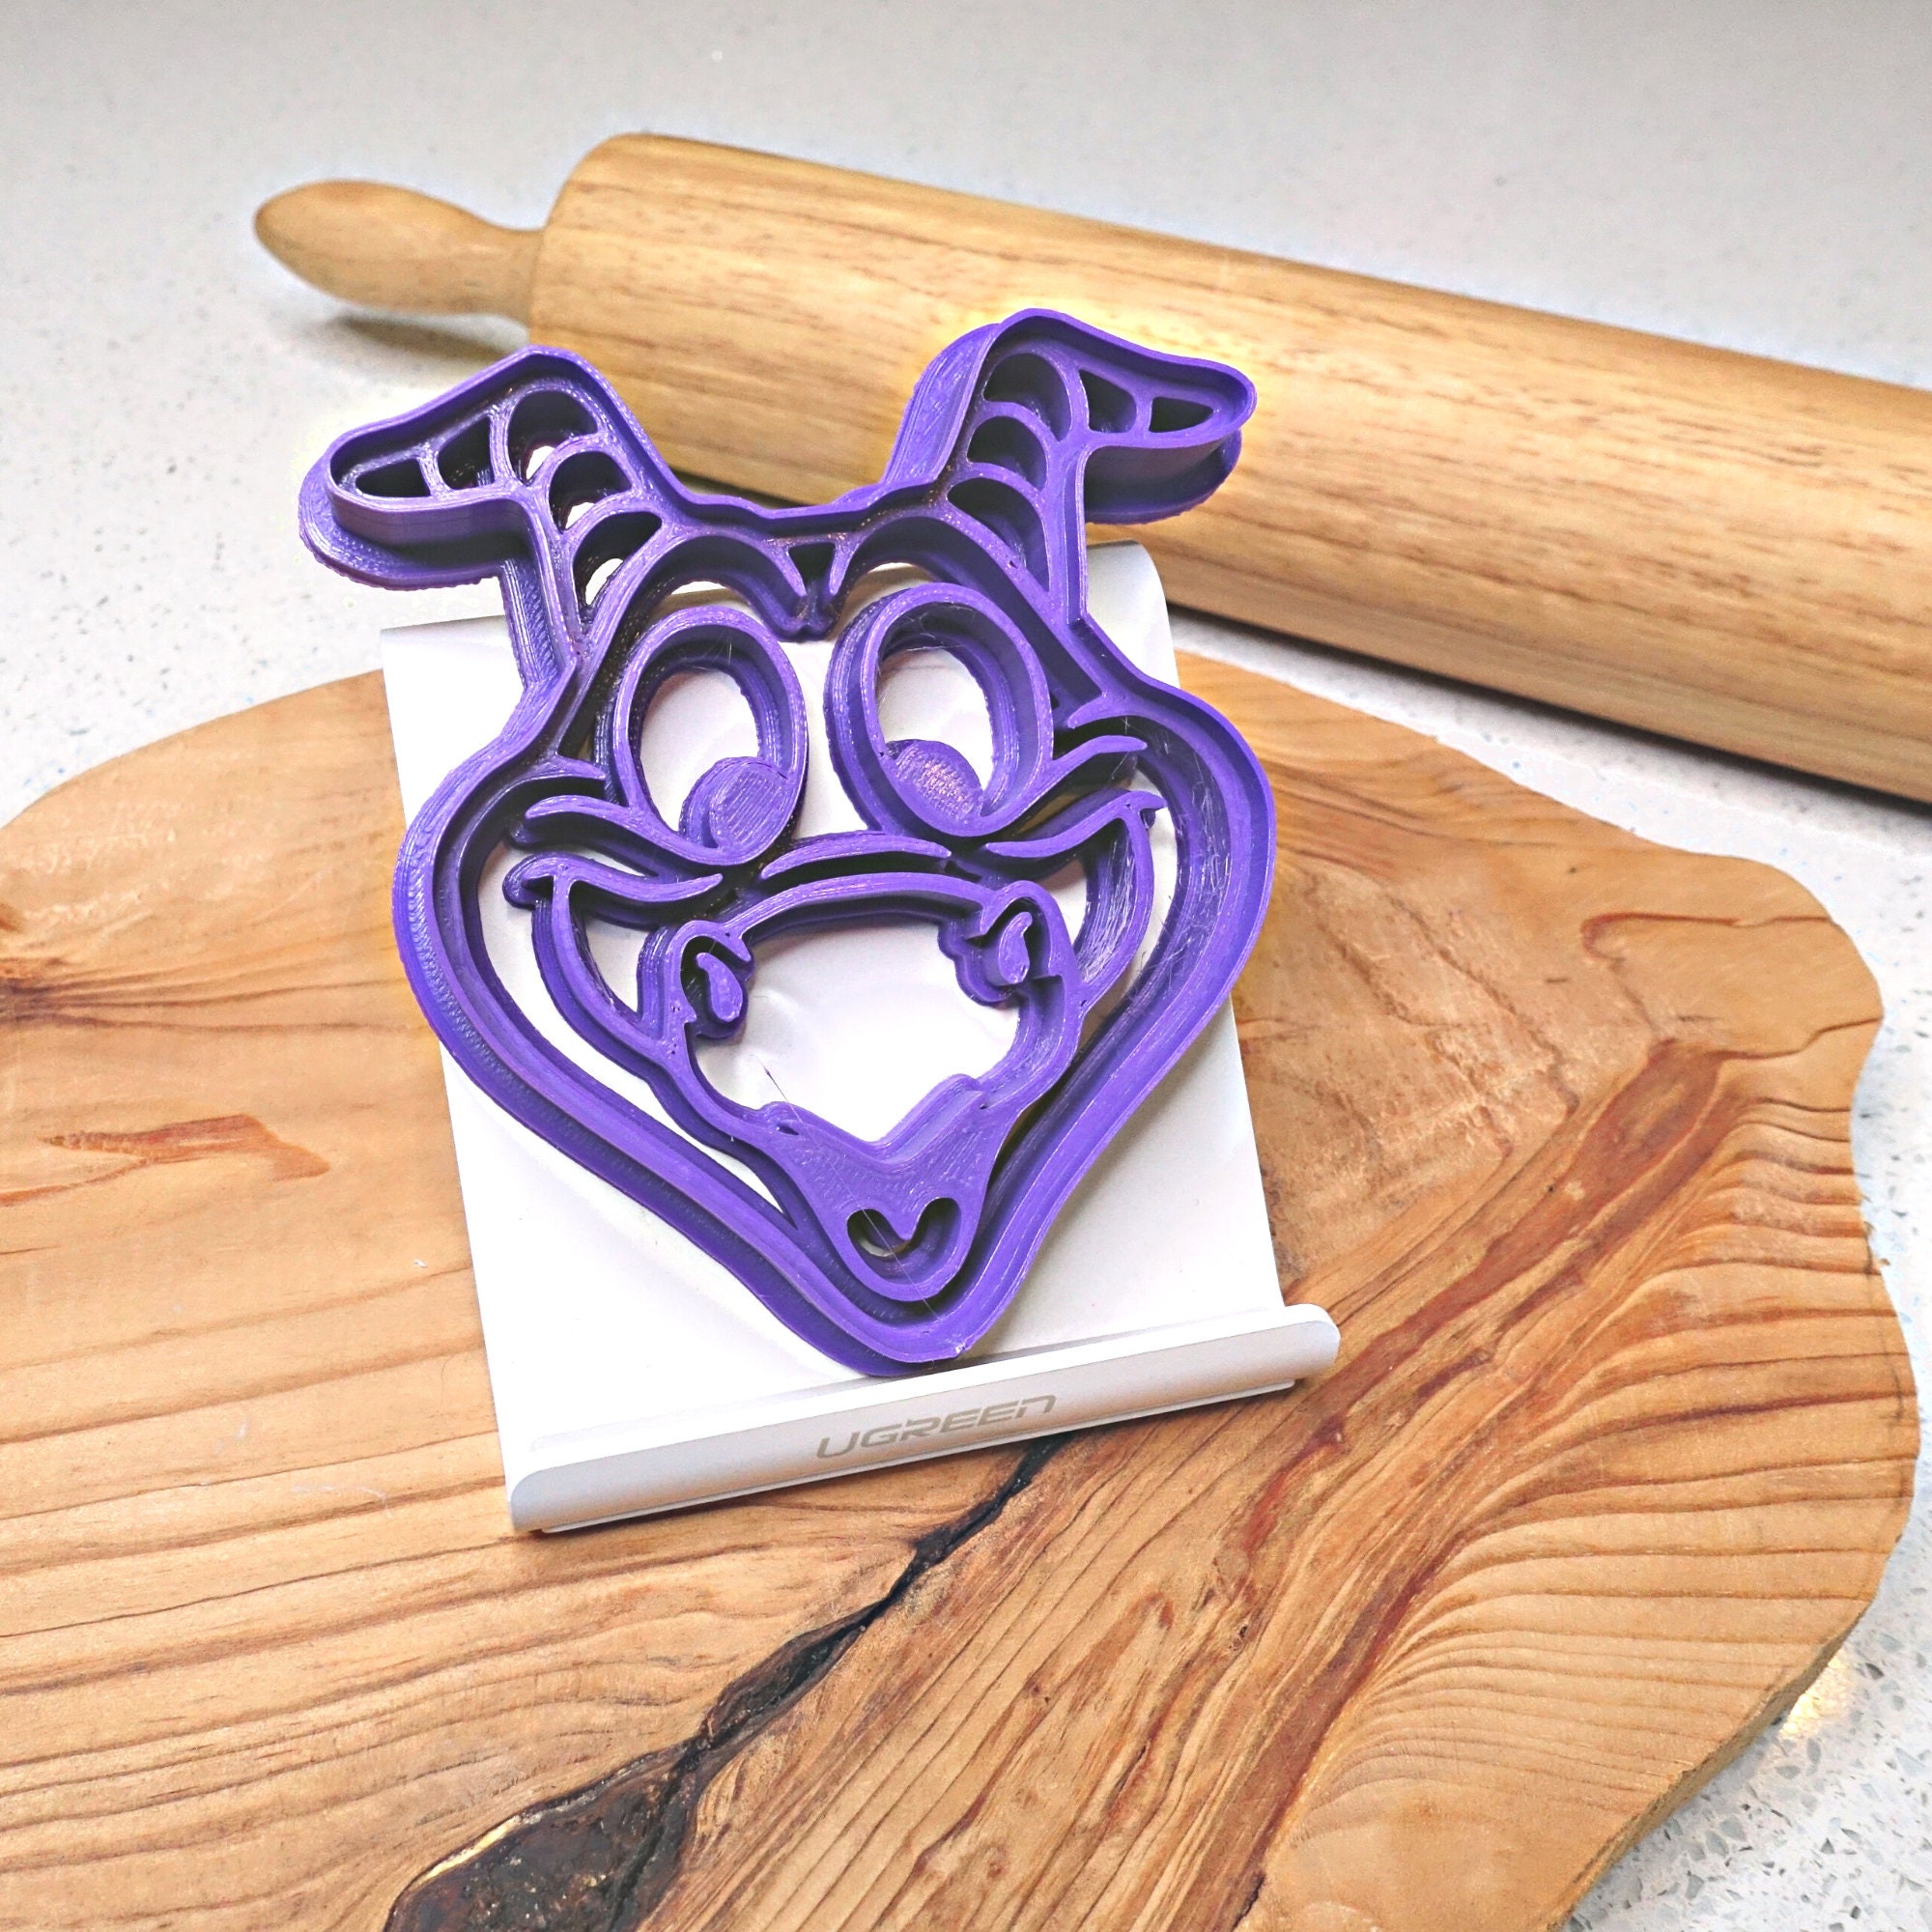 Figment Cookie Cutter 4 PLA Cutter for Baking and Crafts Epcot Inspired  Disney Fan Gift 